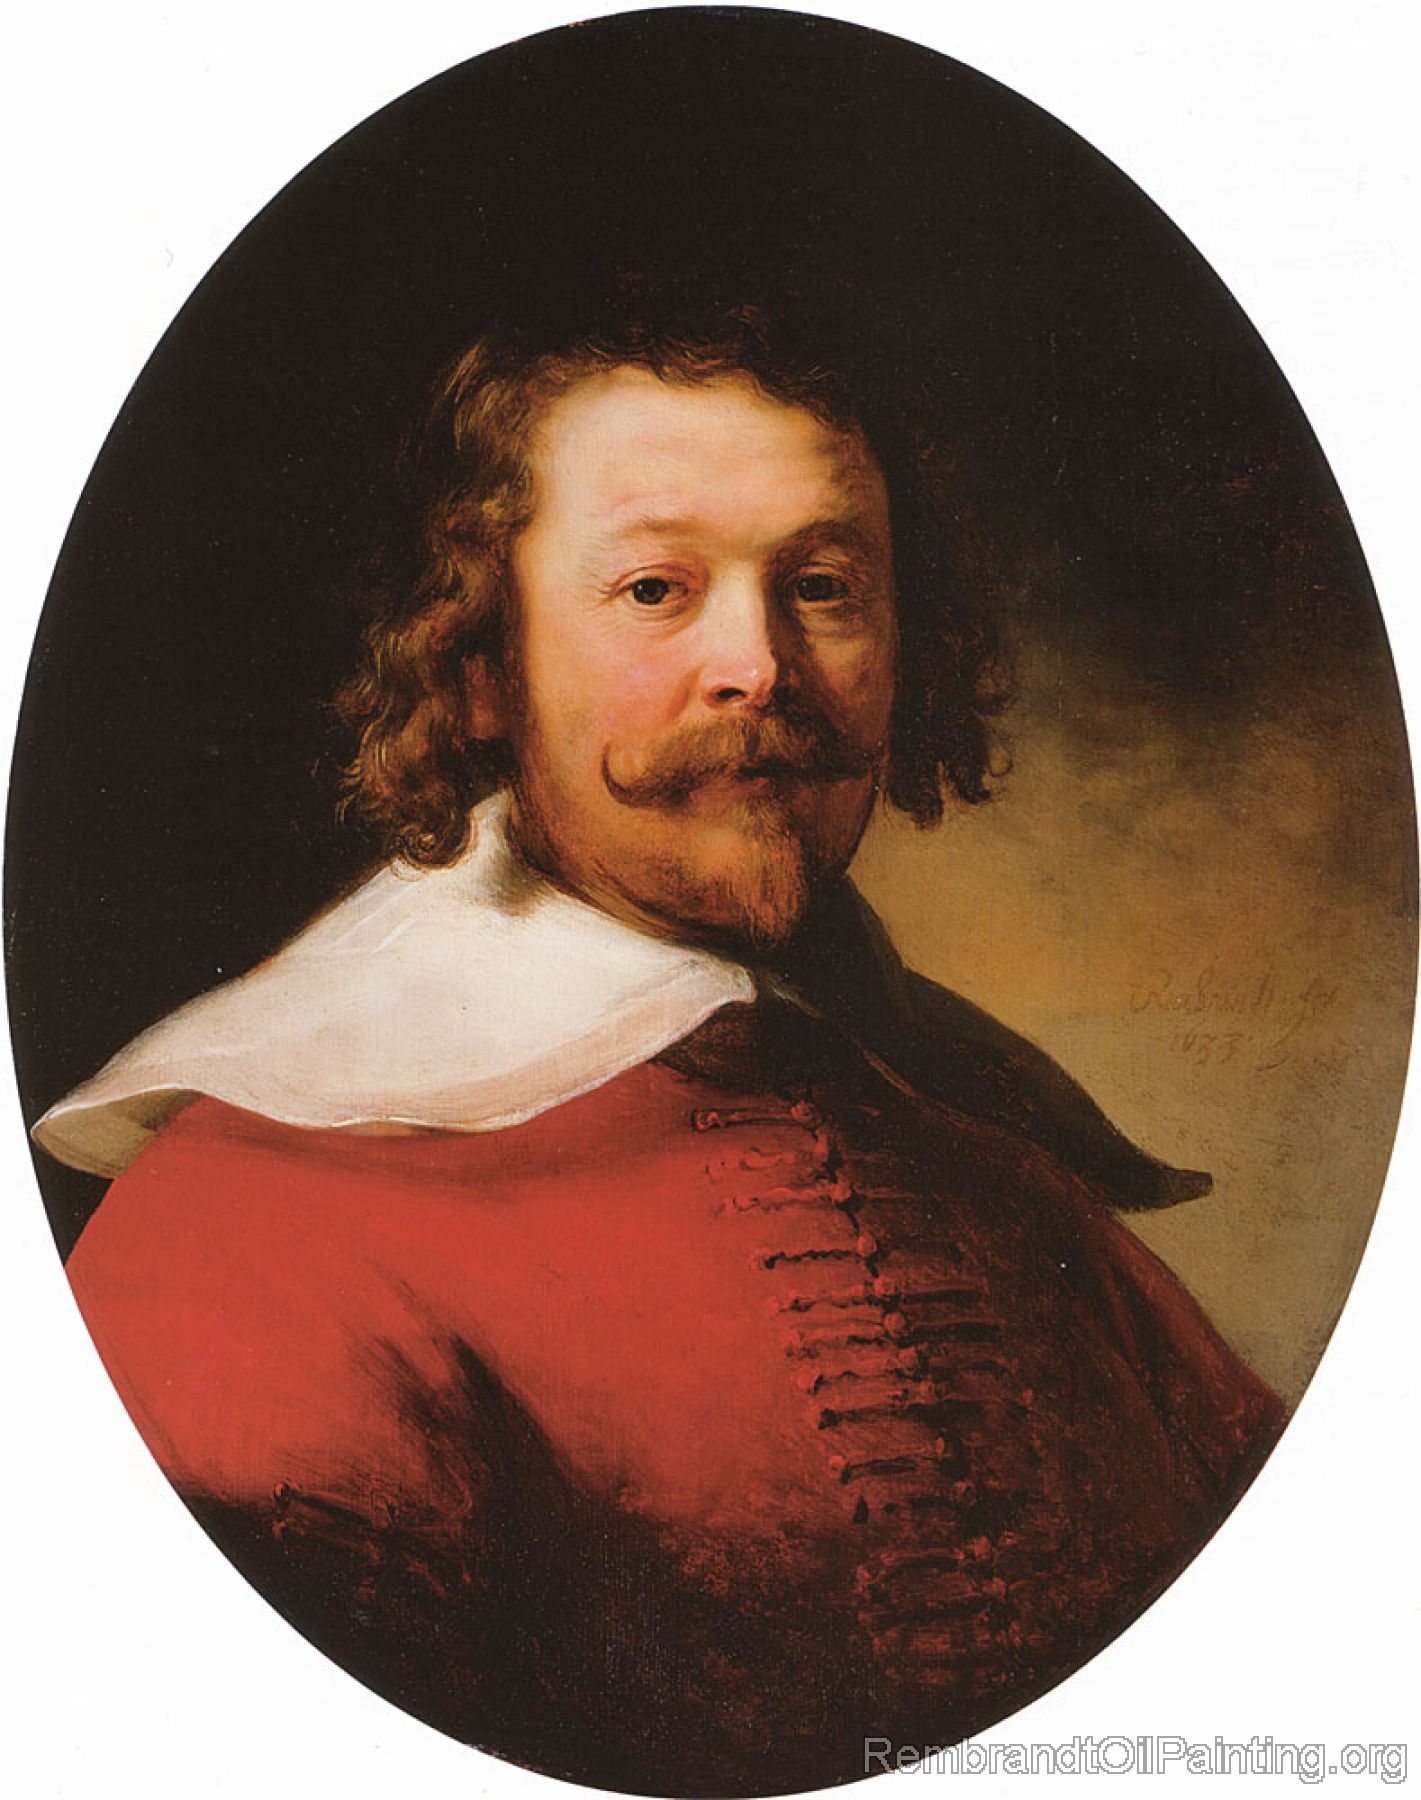 Portrait of a bearded man, bust length, in a red doublet